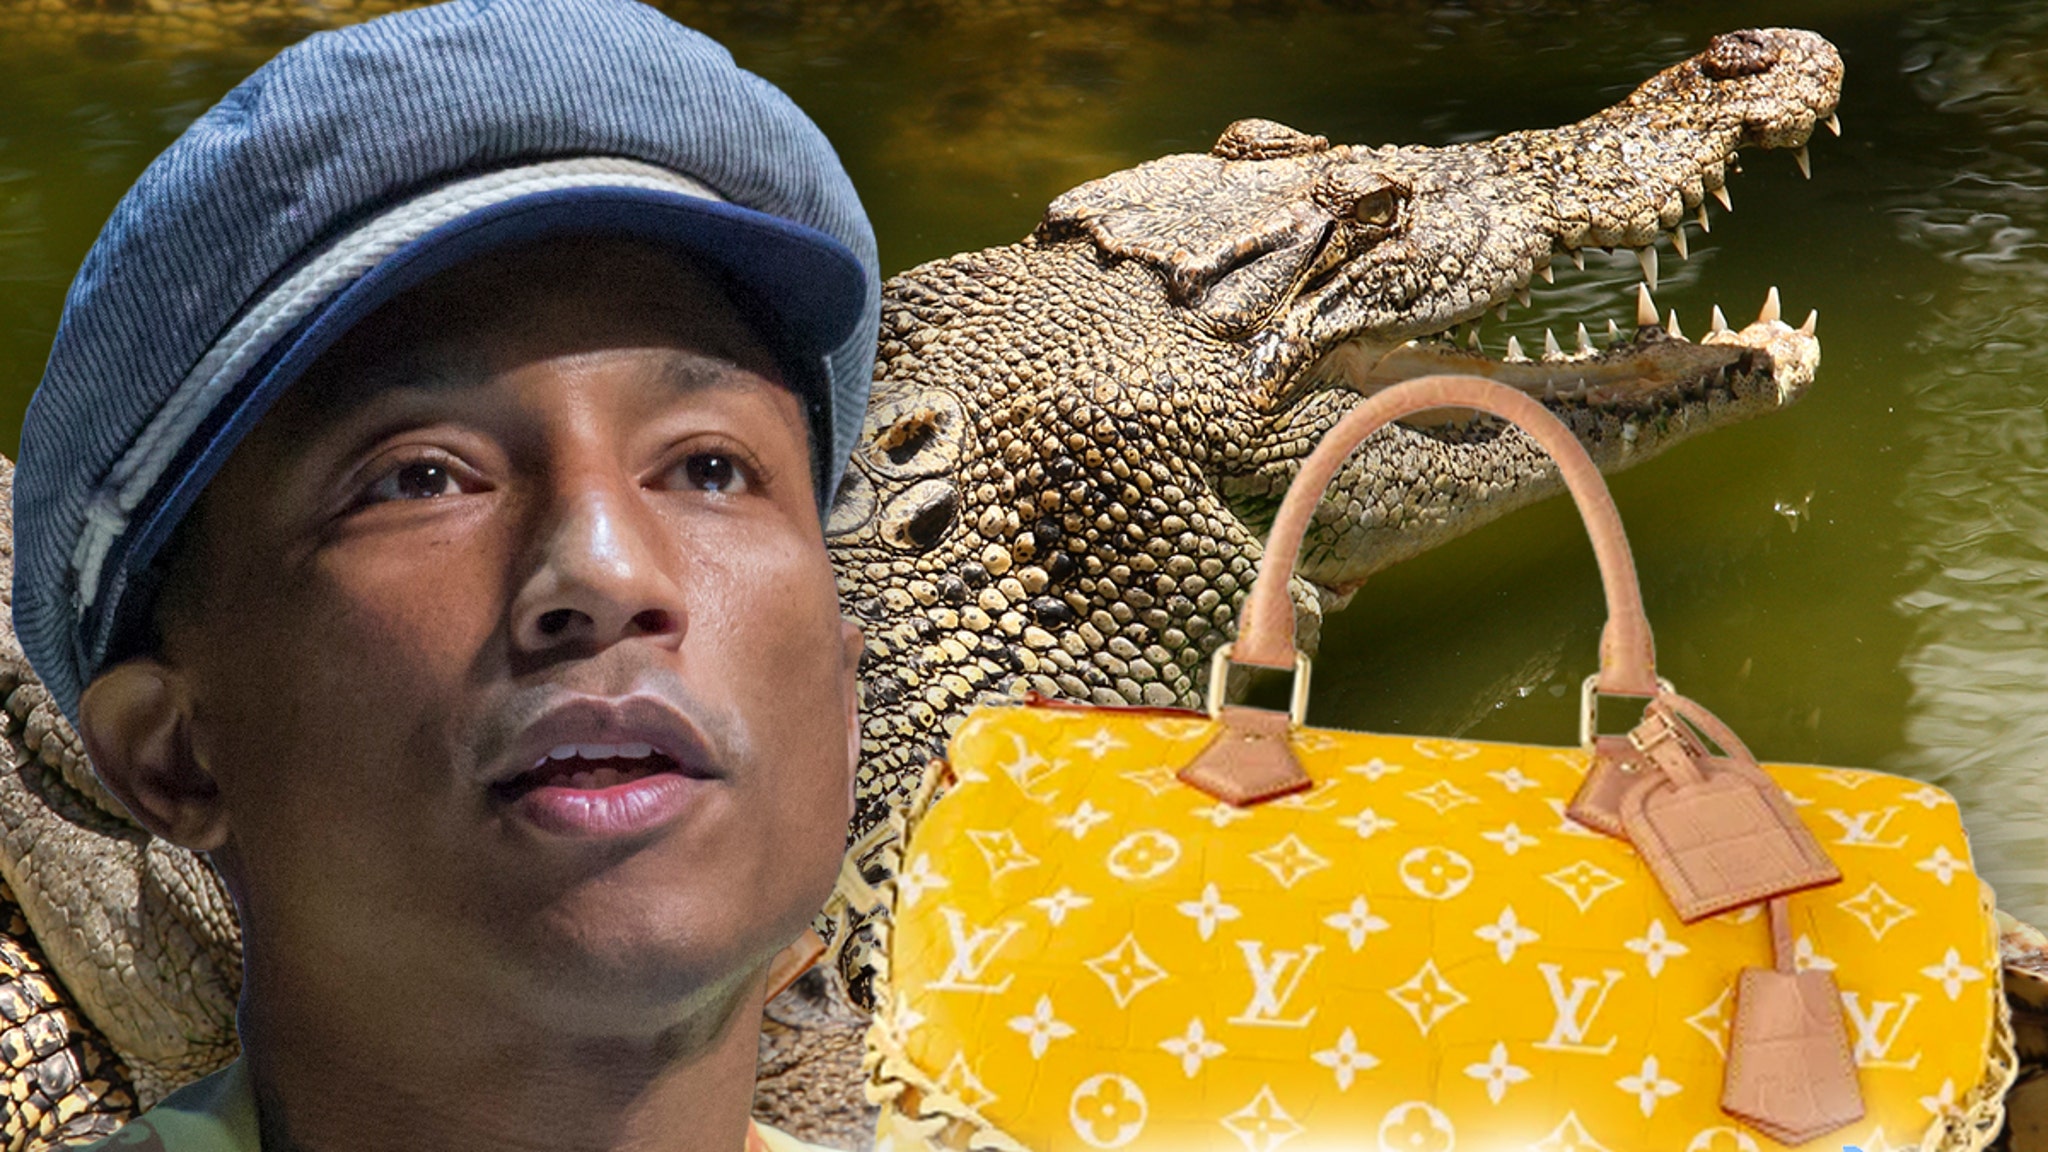 Louis Vuitton - Apps on Google Play